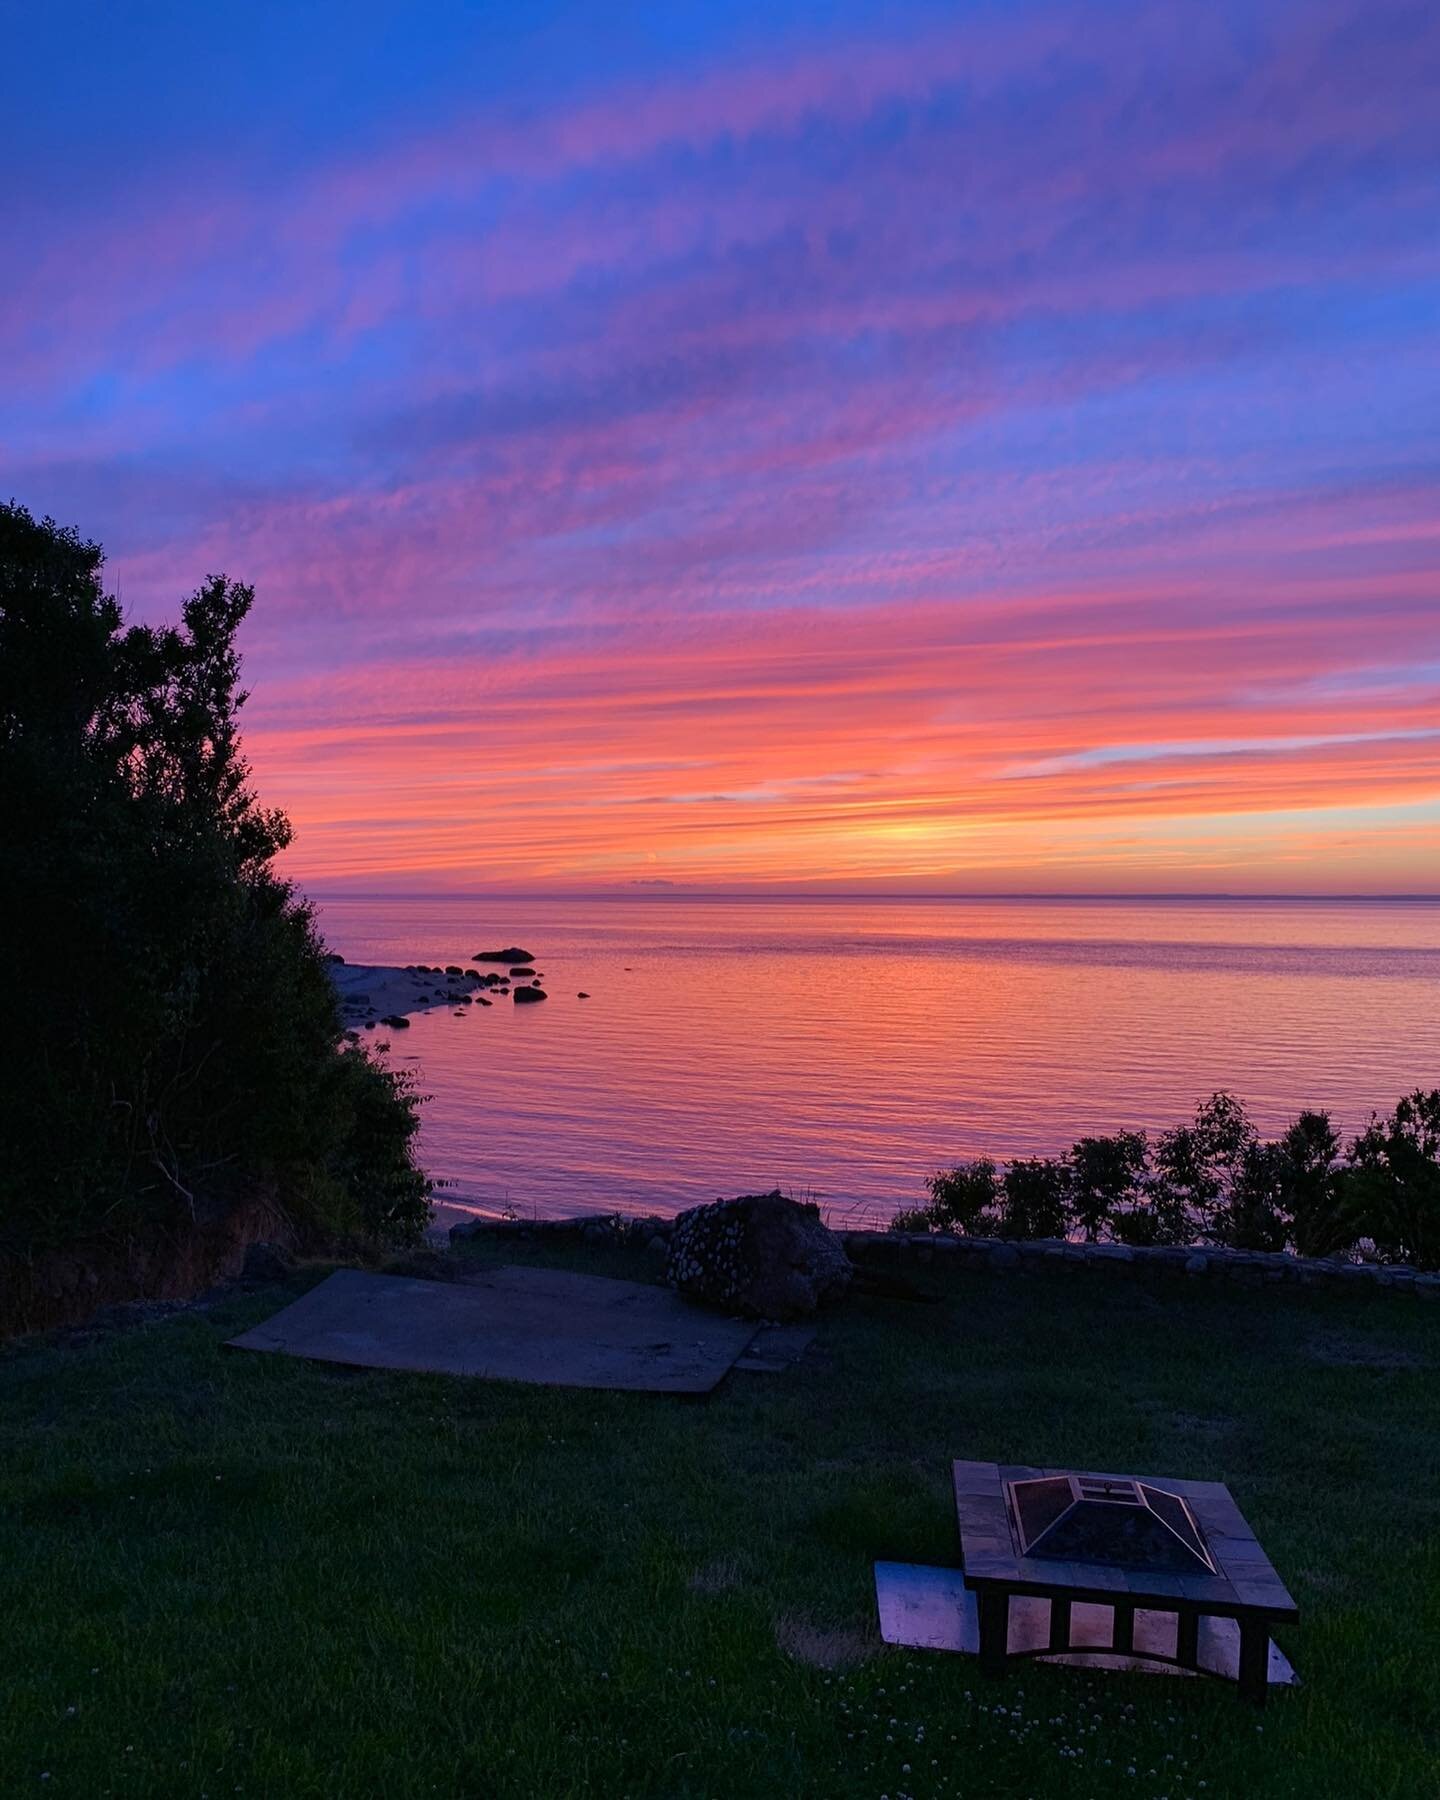 Candy colored skies on the North Fork 🍭
Veterans weekend available to rent &mdash; email john@aquaviewnofo.com 💌